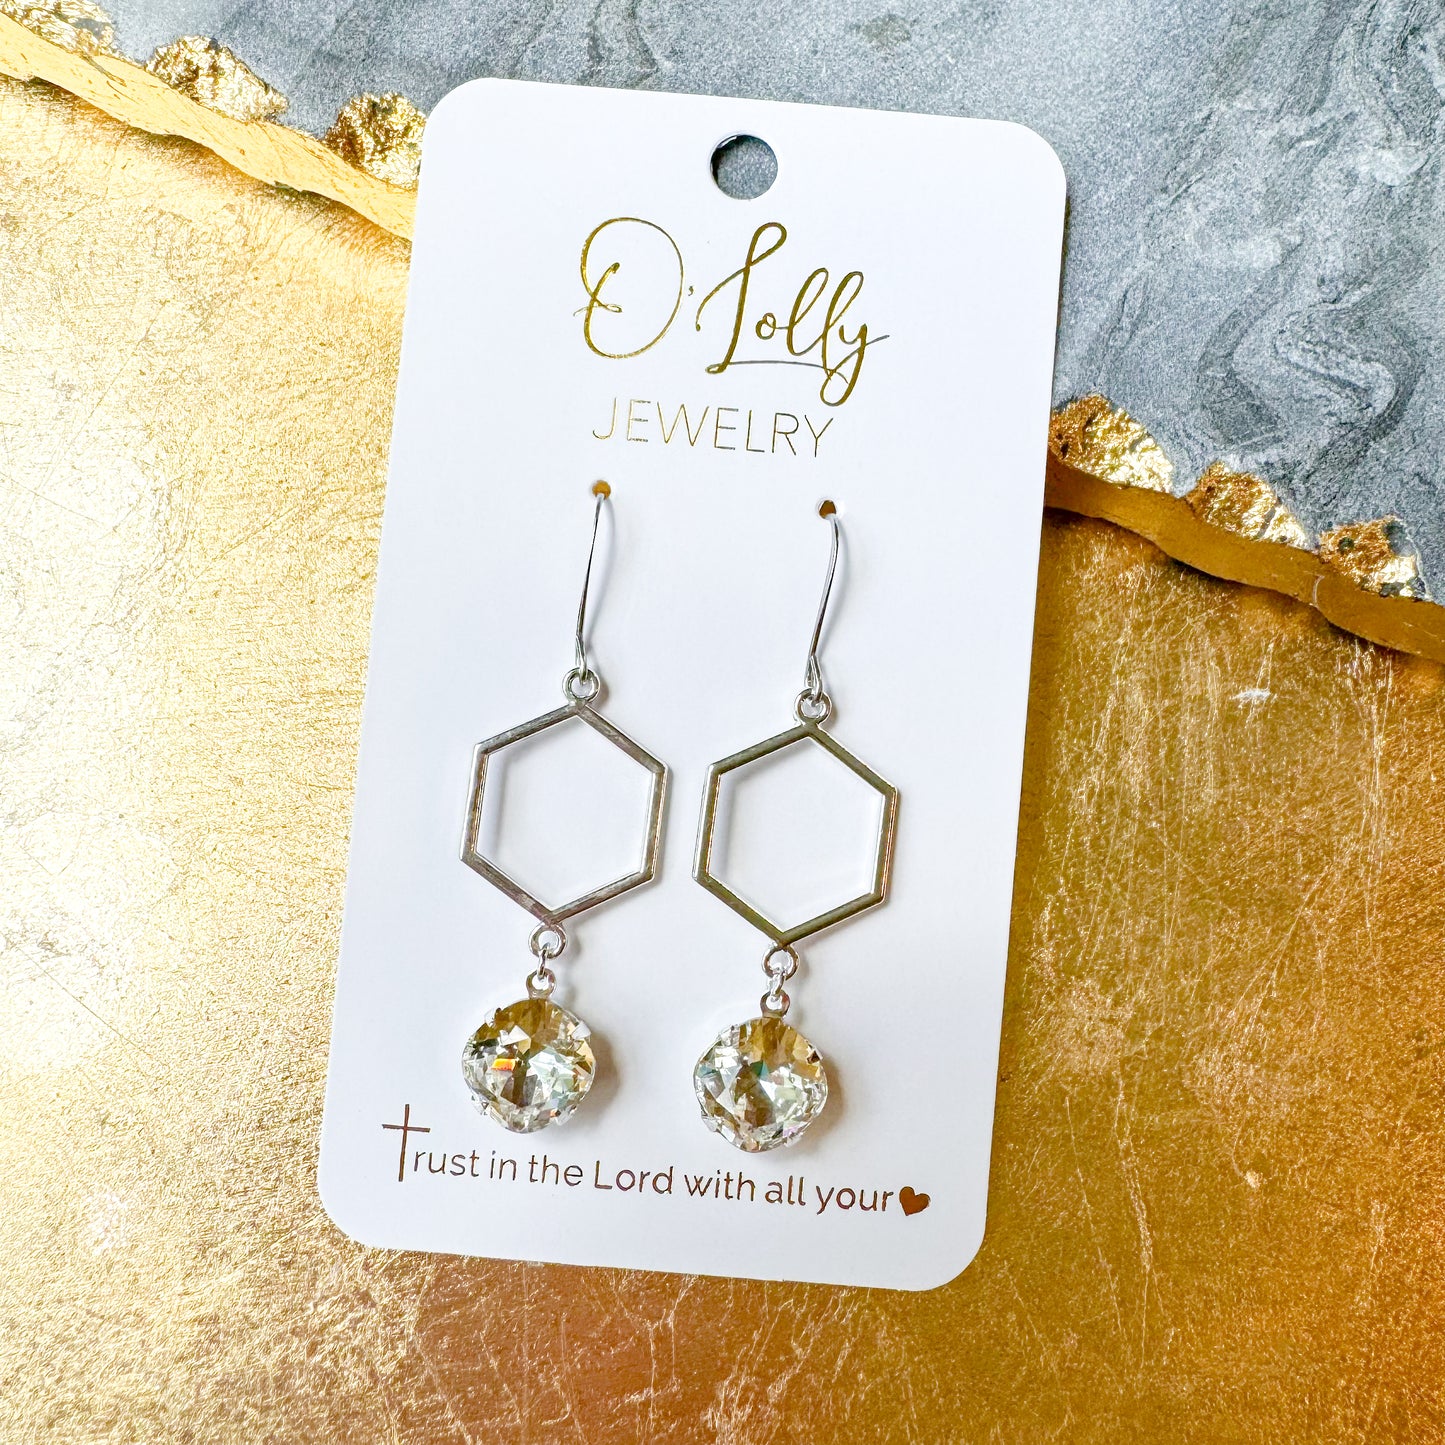 O’Lolly “Everly” Earrings- Hexagon w/Clear Stones